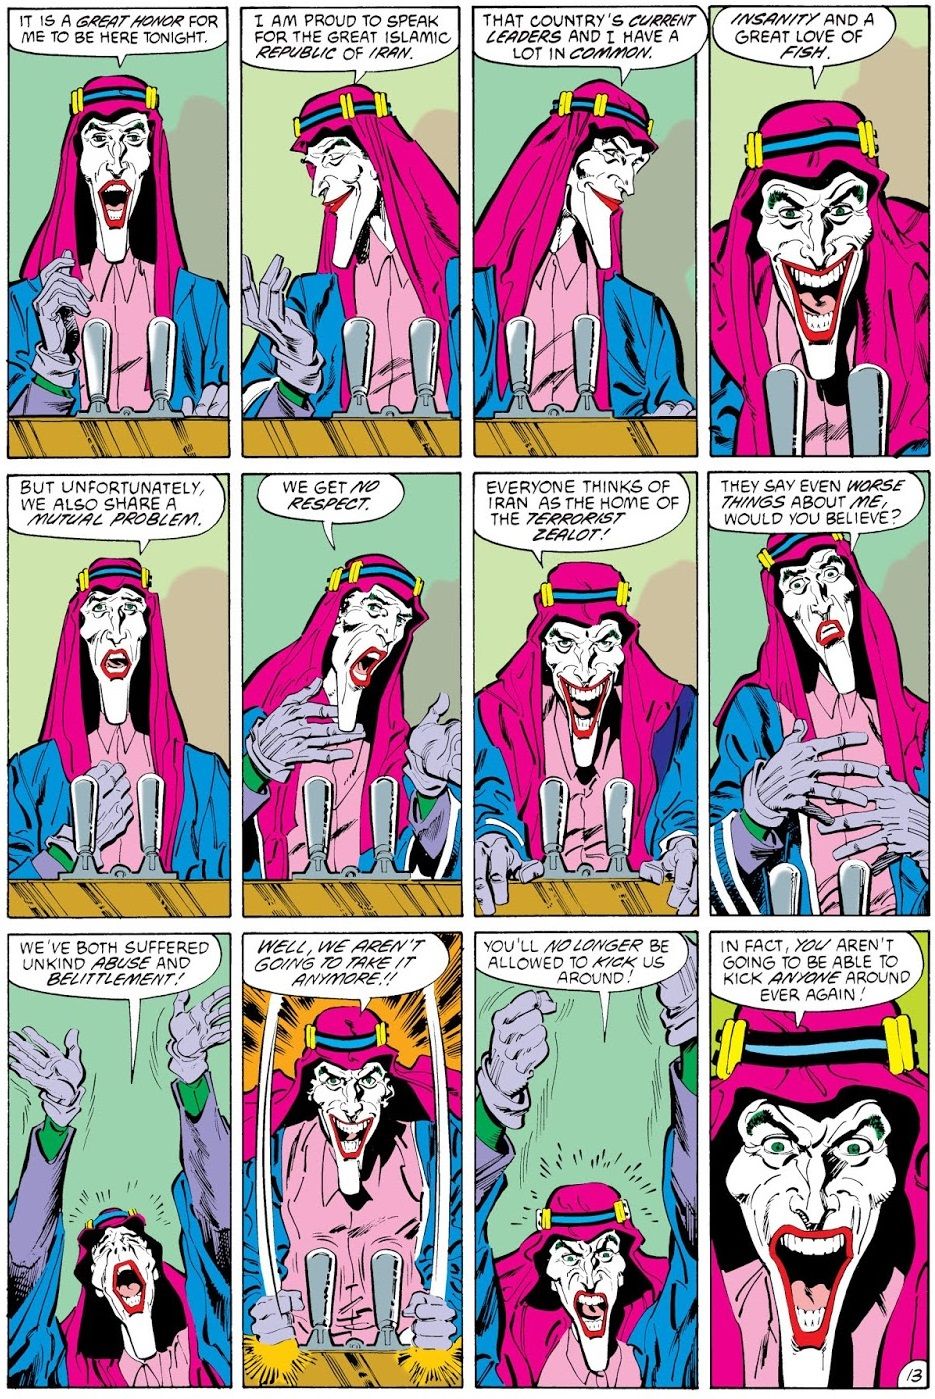 The Joker Was Once DC's U.N. Ambassador from Iran... Until He Wasn't